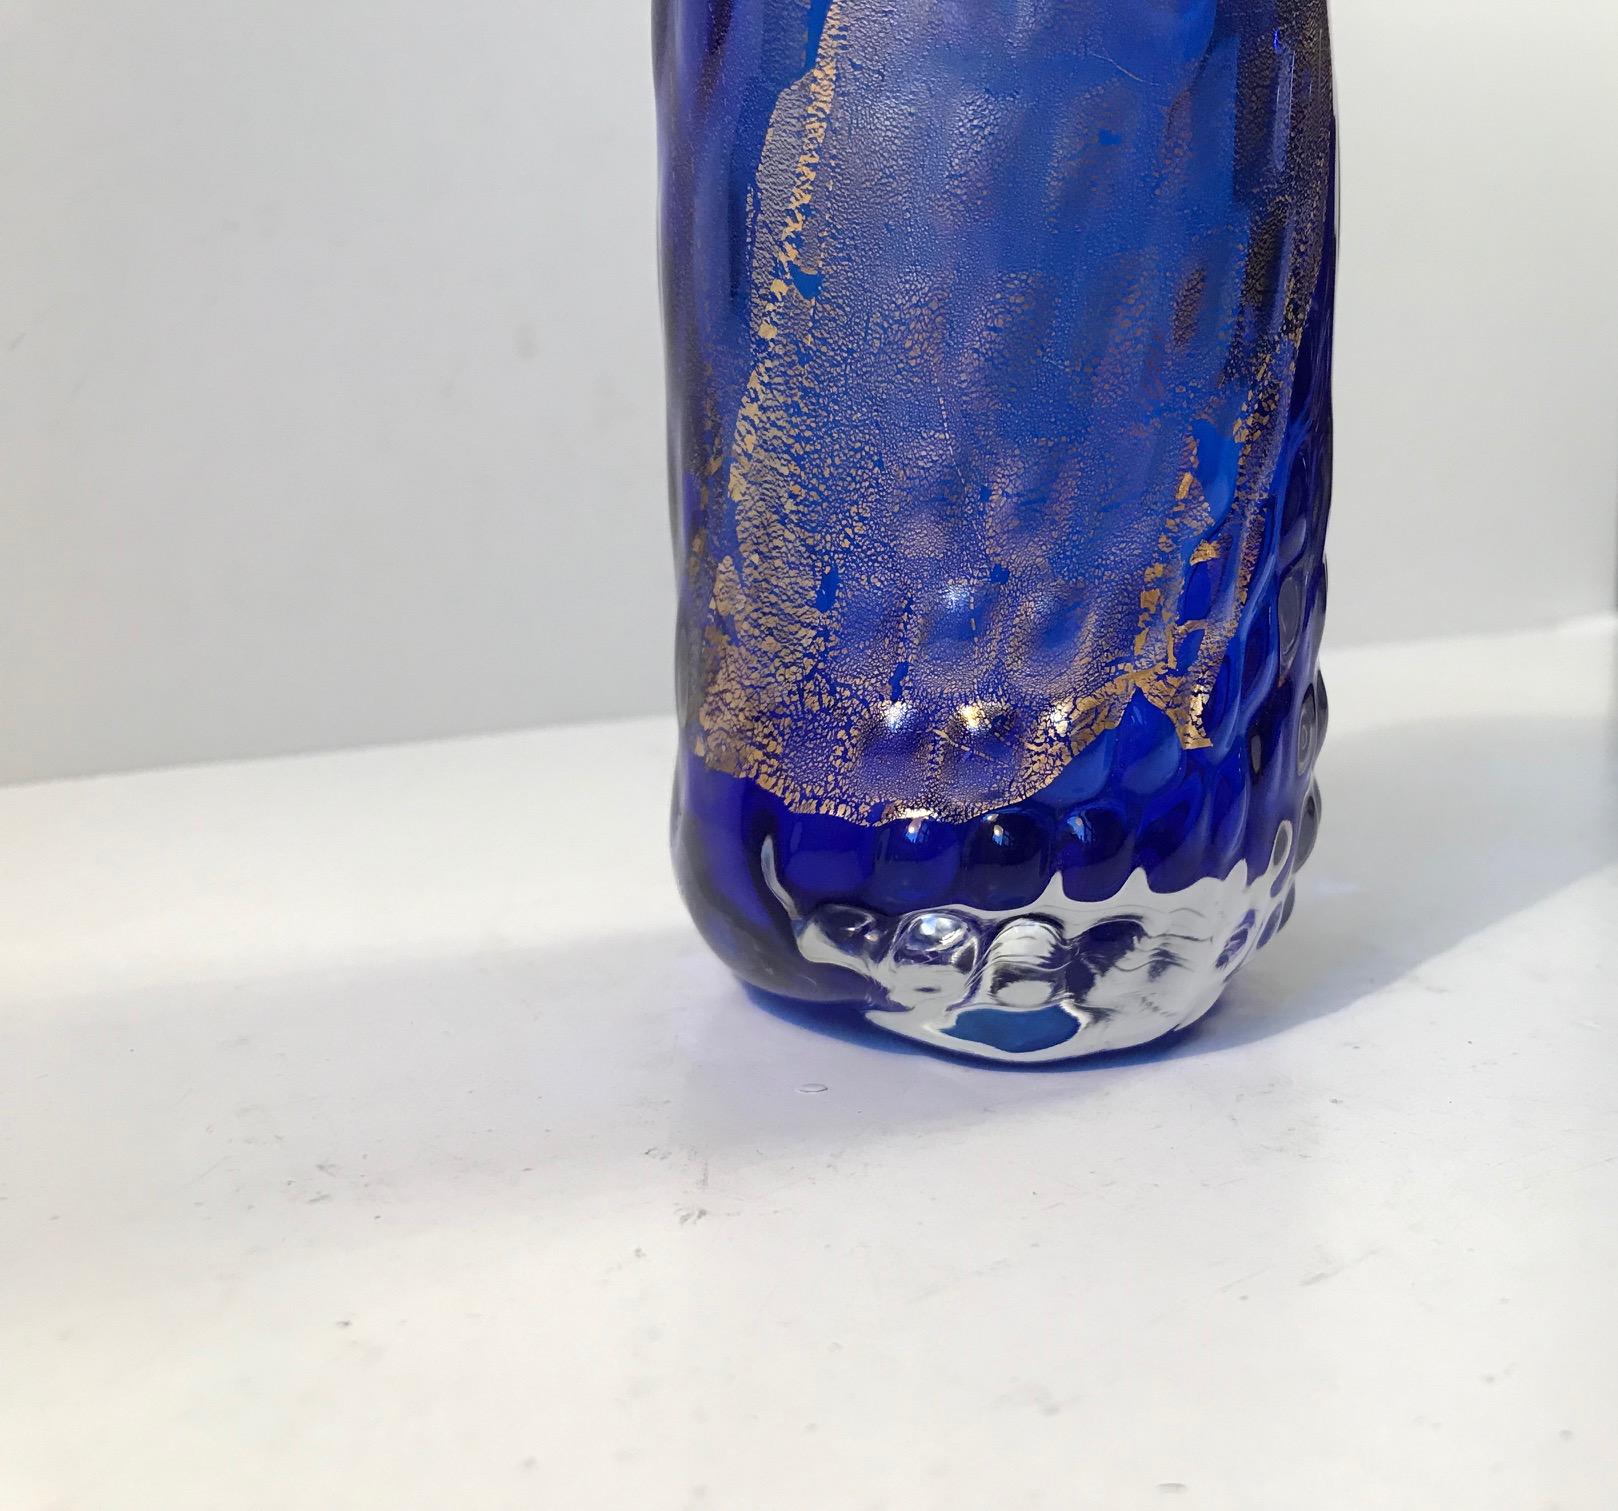 Blue glass vase decorated and infused with 24-carat gold dust. Its a unique piece and it was created during the 1990s by Tchai Munch who owns a workshop in Ebeltoft, Denmark. During the 1980s, 1990s and 00s she has a close relationship with Finn